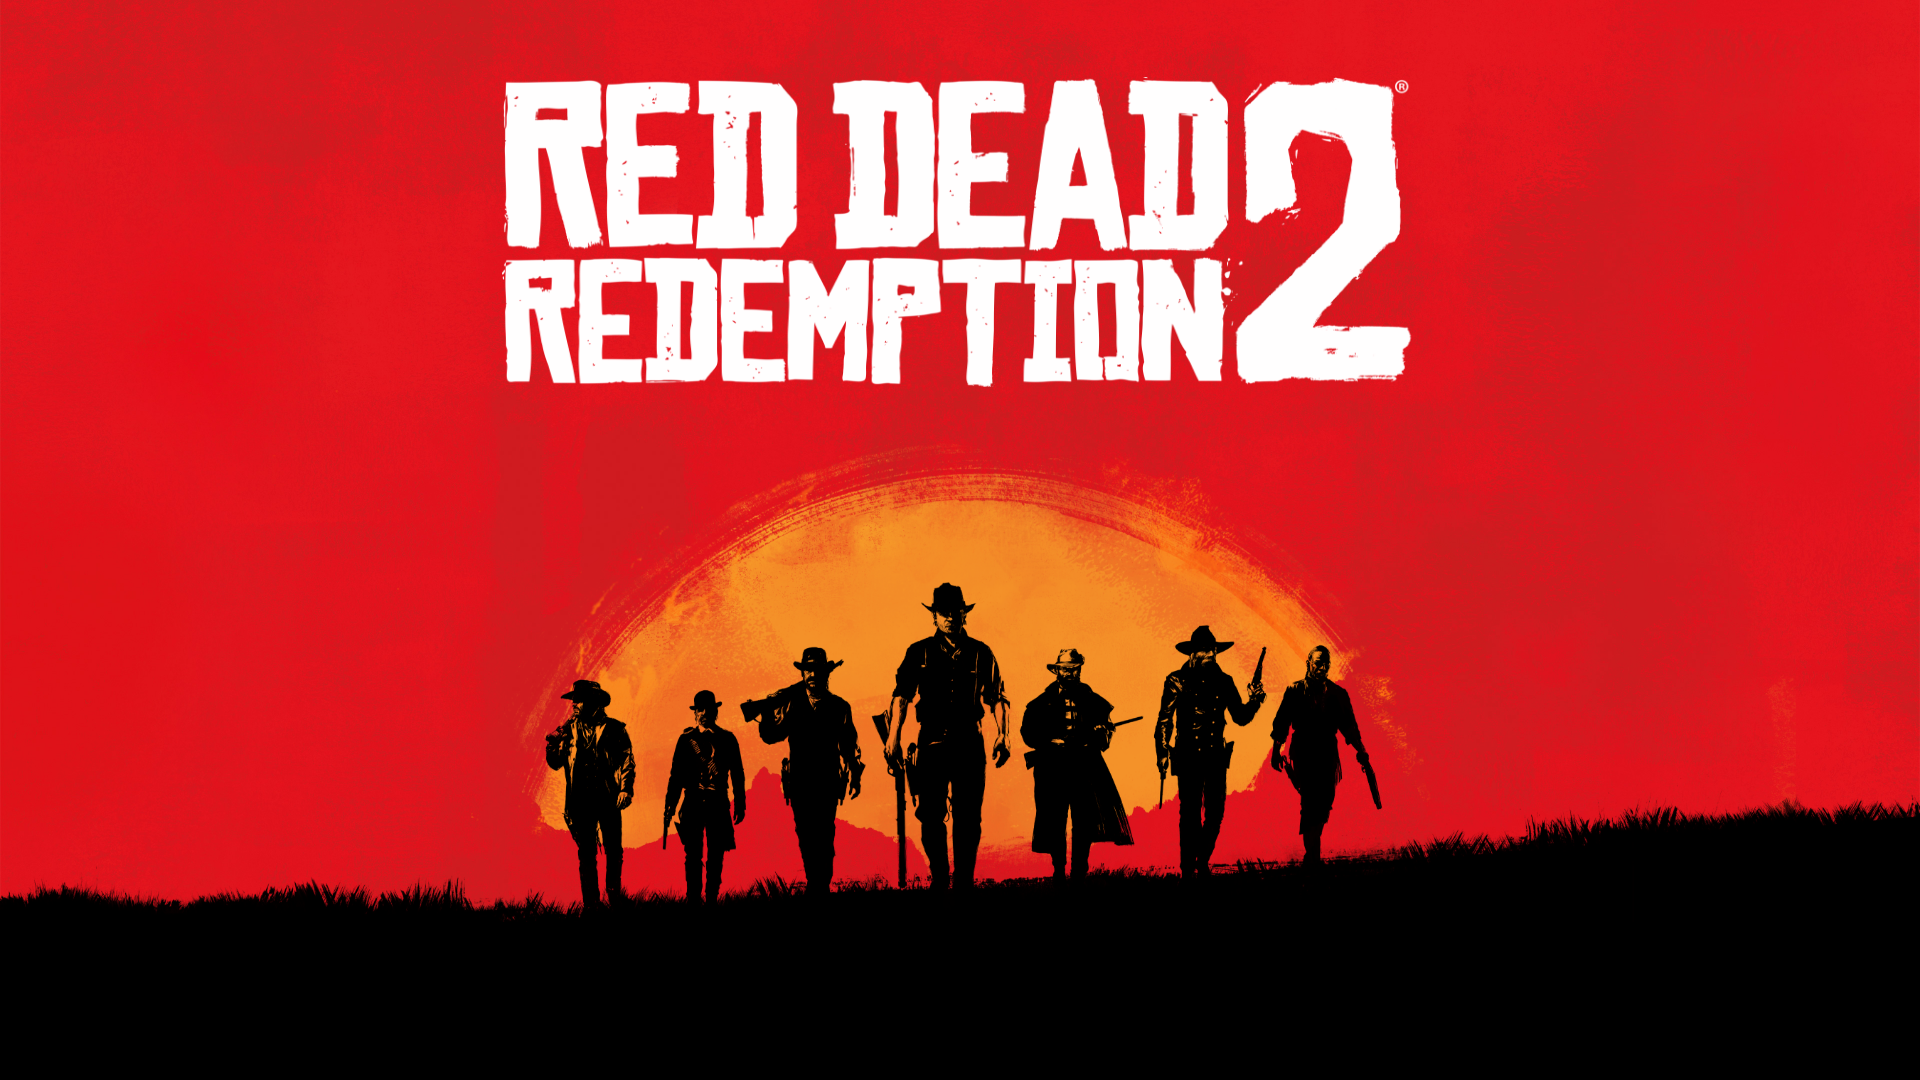 Red Dead Redemption Wallpaper Image Photos Pictures